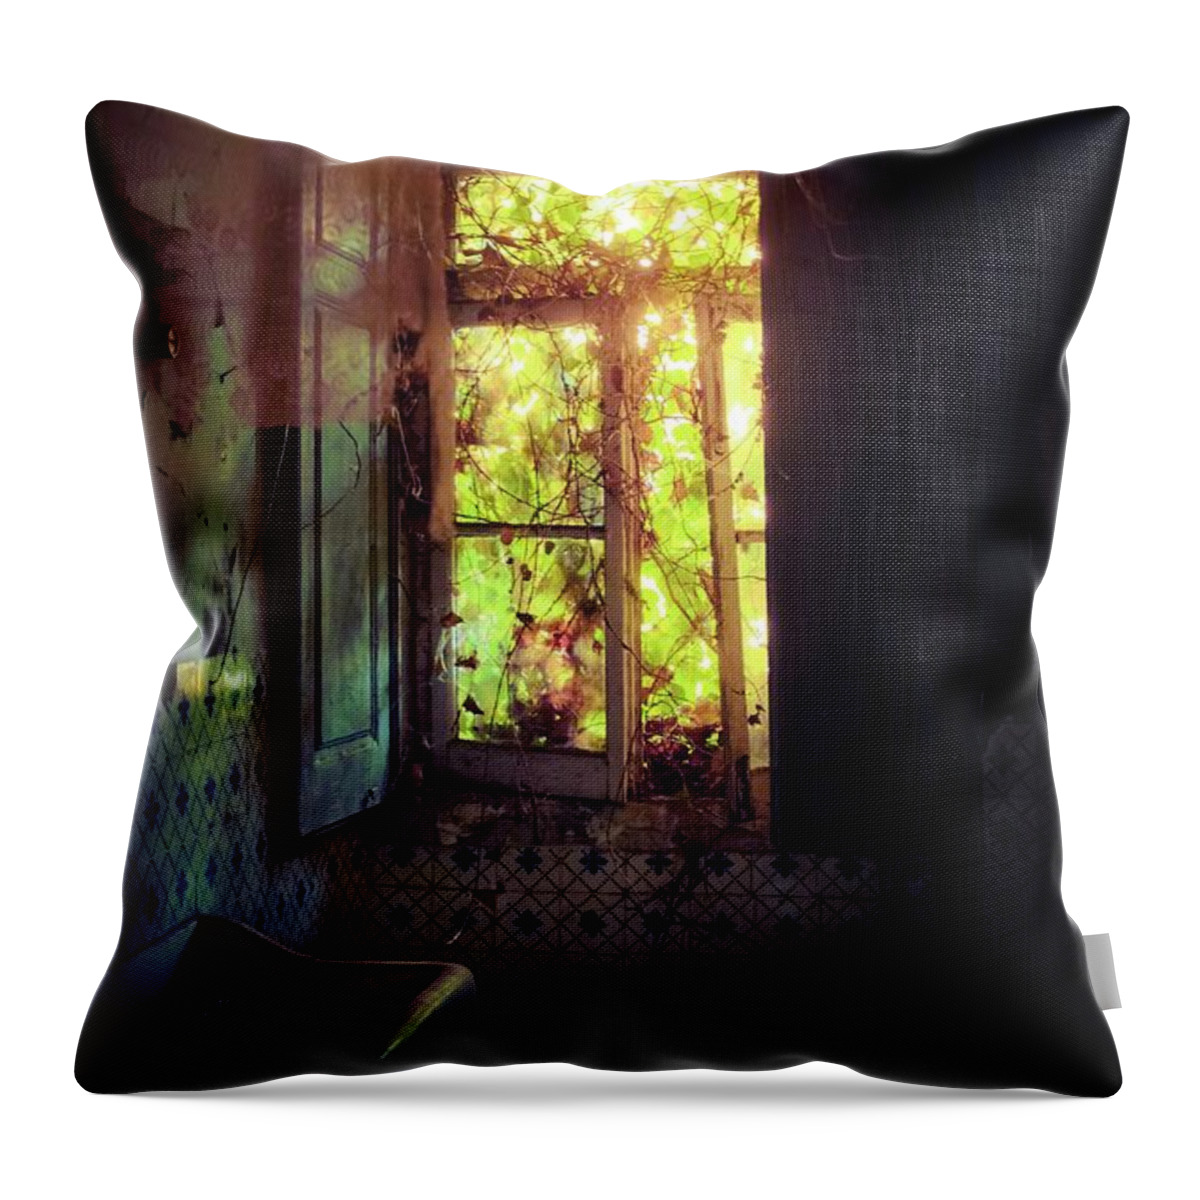 Abandoned Throw Pillow featuring the photograph Ruined Bathroom by Carlos Caetano